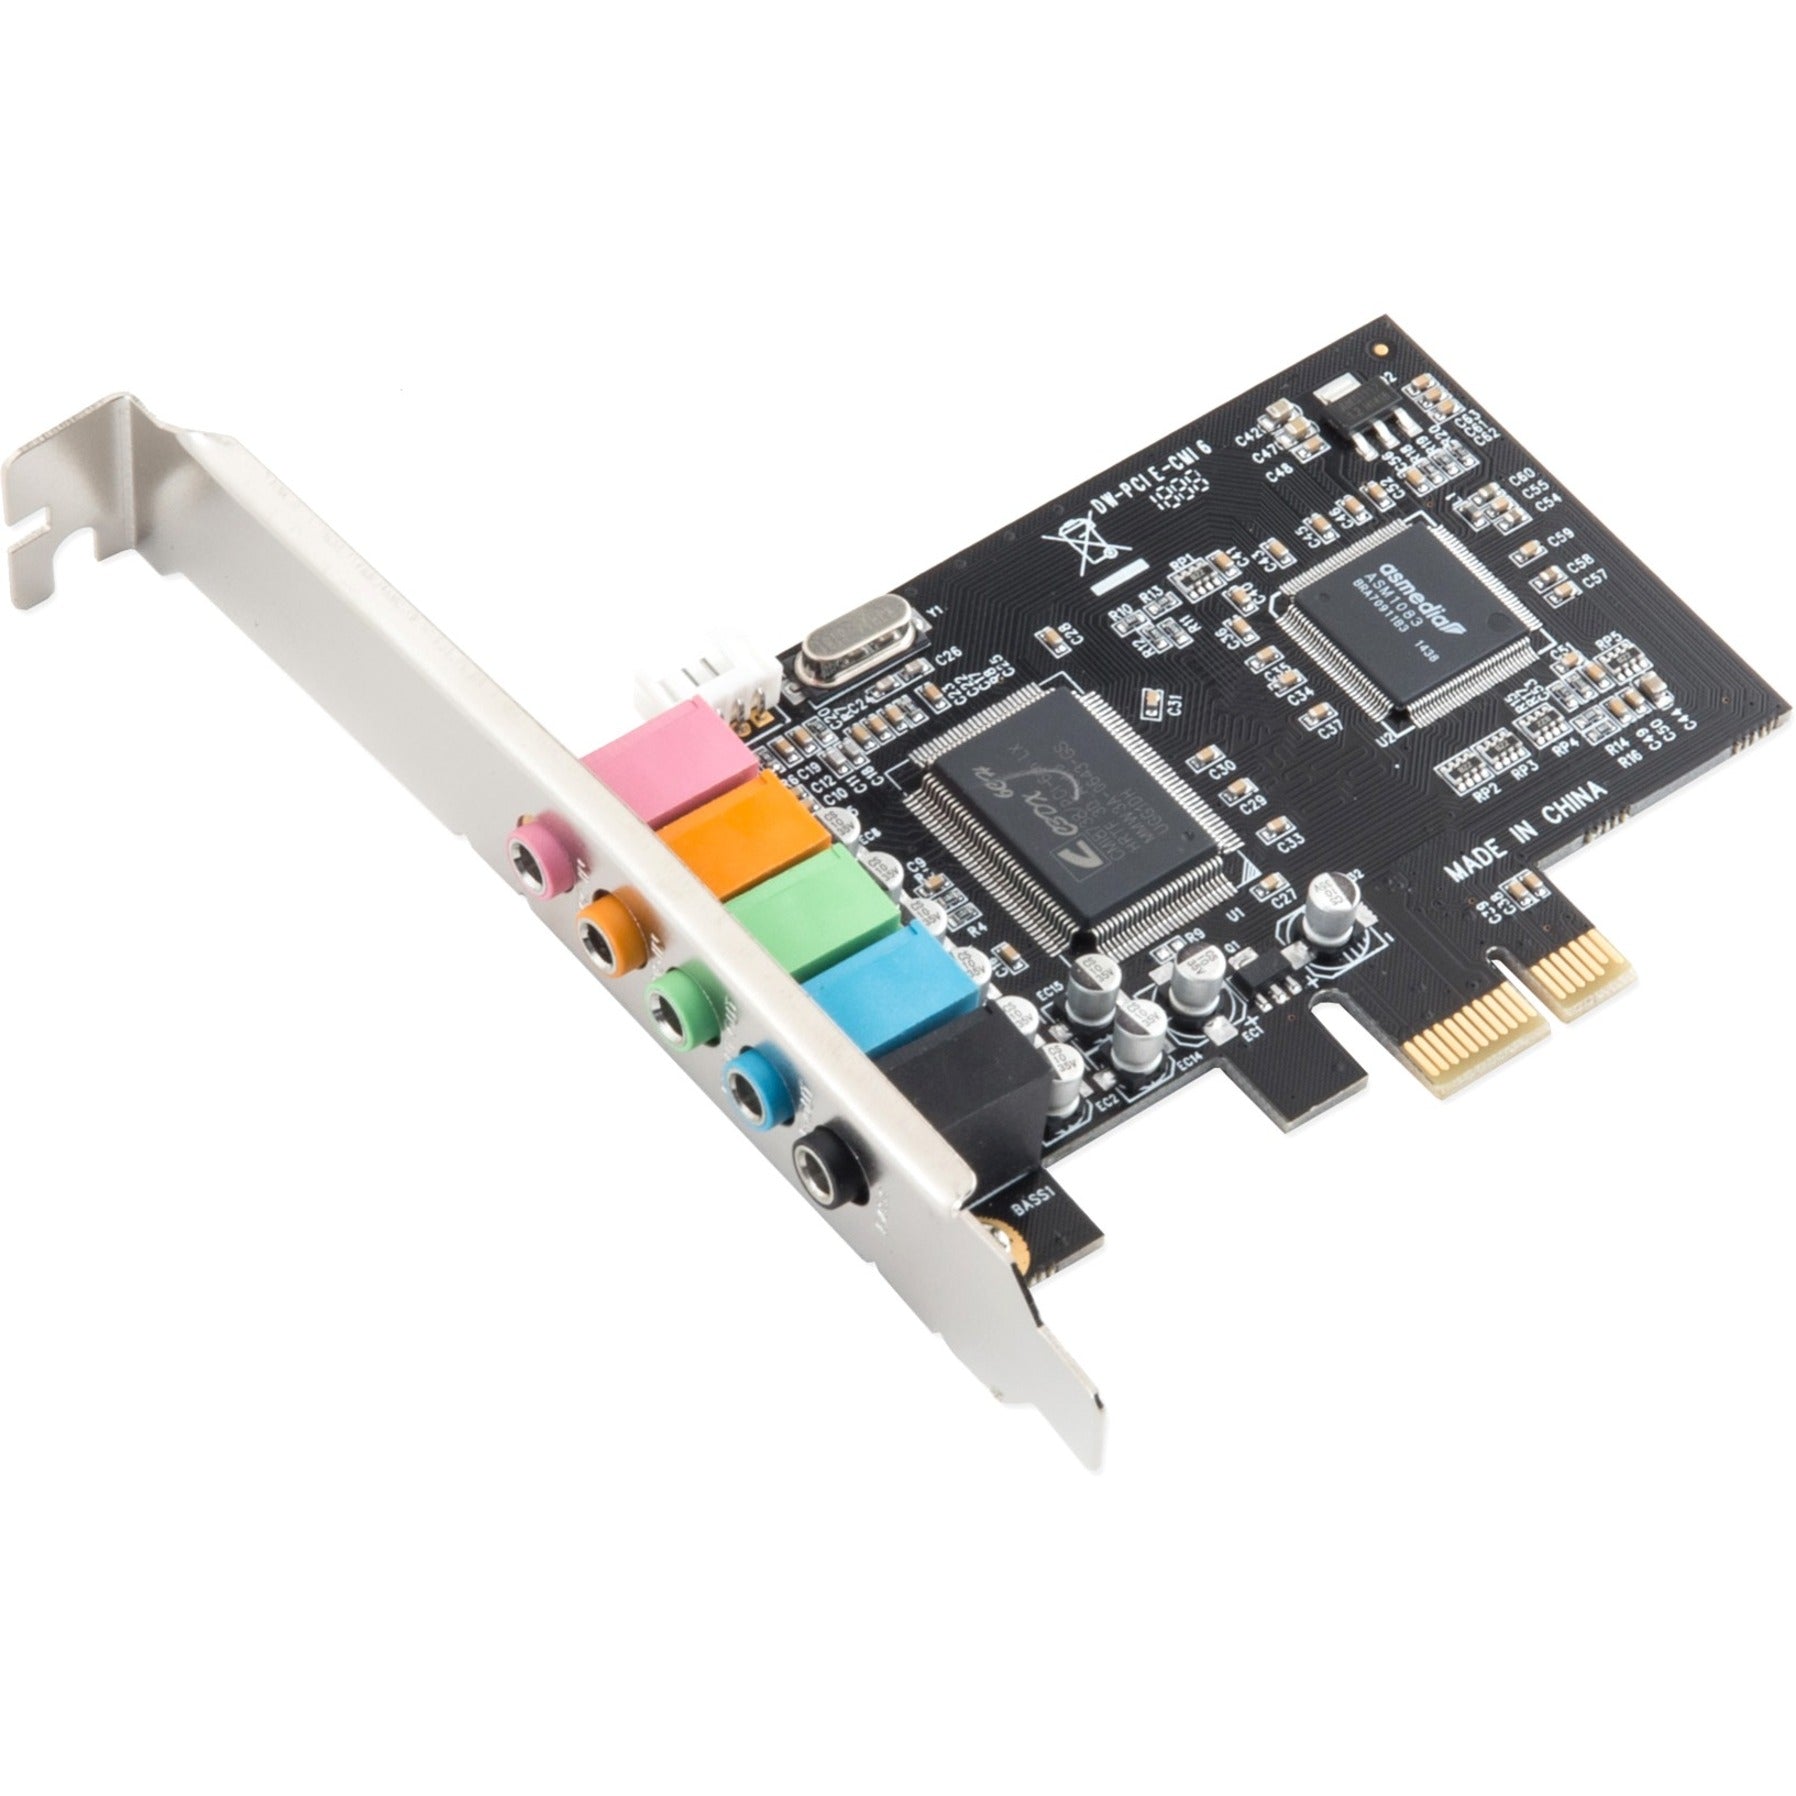 SYBA Multimedia SI-PEX63096 5.1 Channel PCI-e x1 Sound Card, Enhance Your Audio Experience